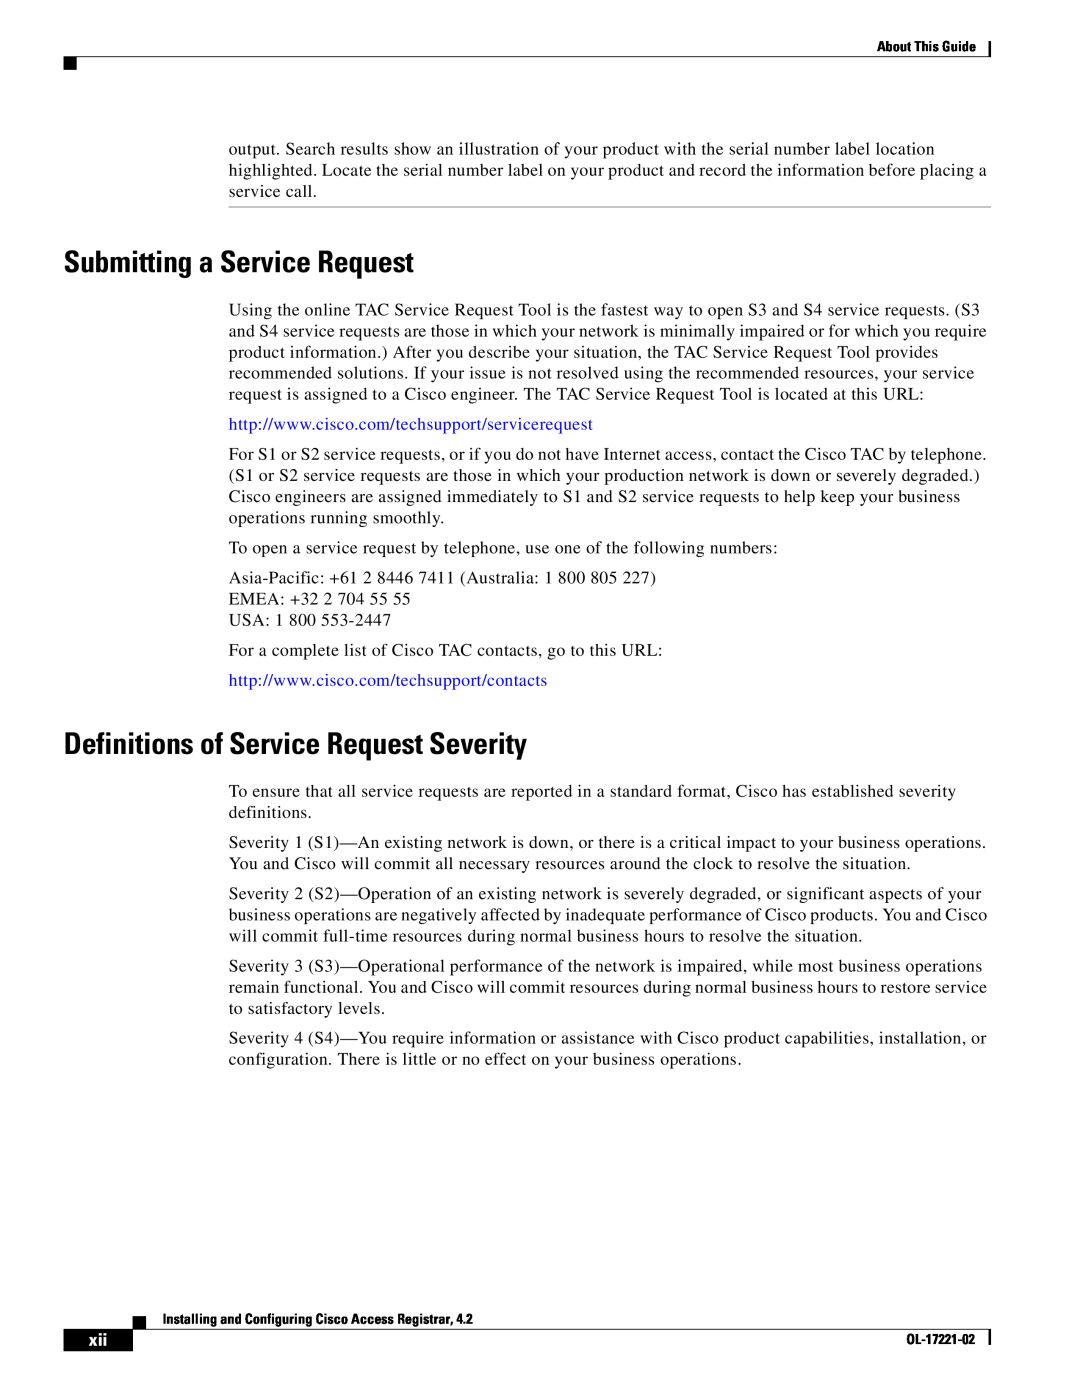 Cisco Systems 4.2 manual Submitting a Service Request, Definitions of Service Request Severity 